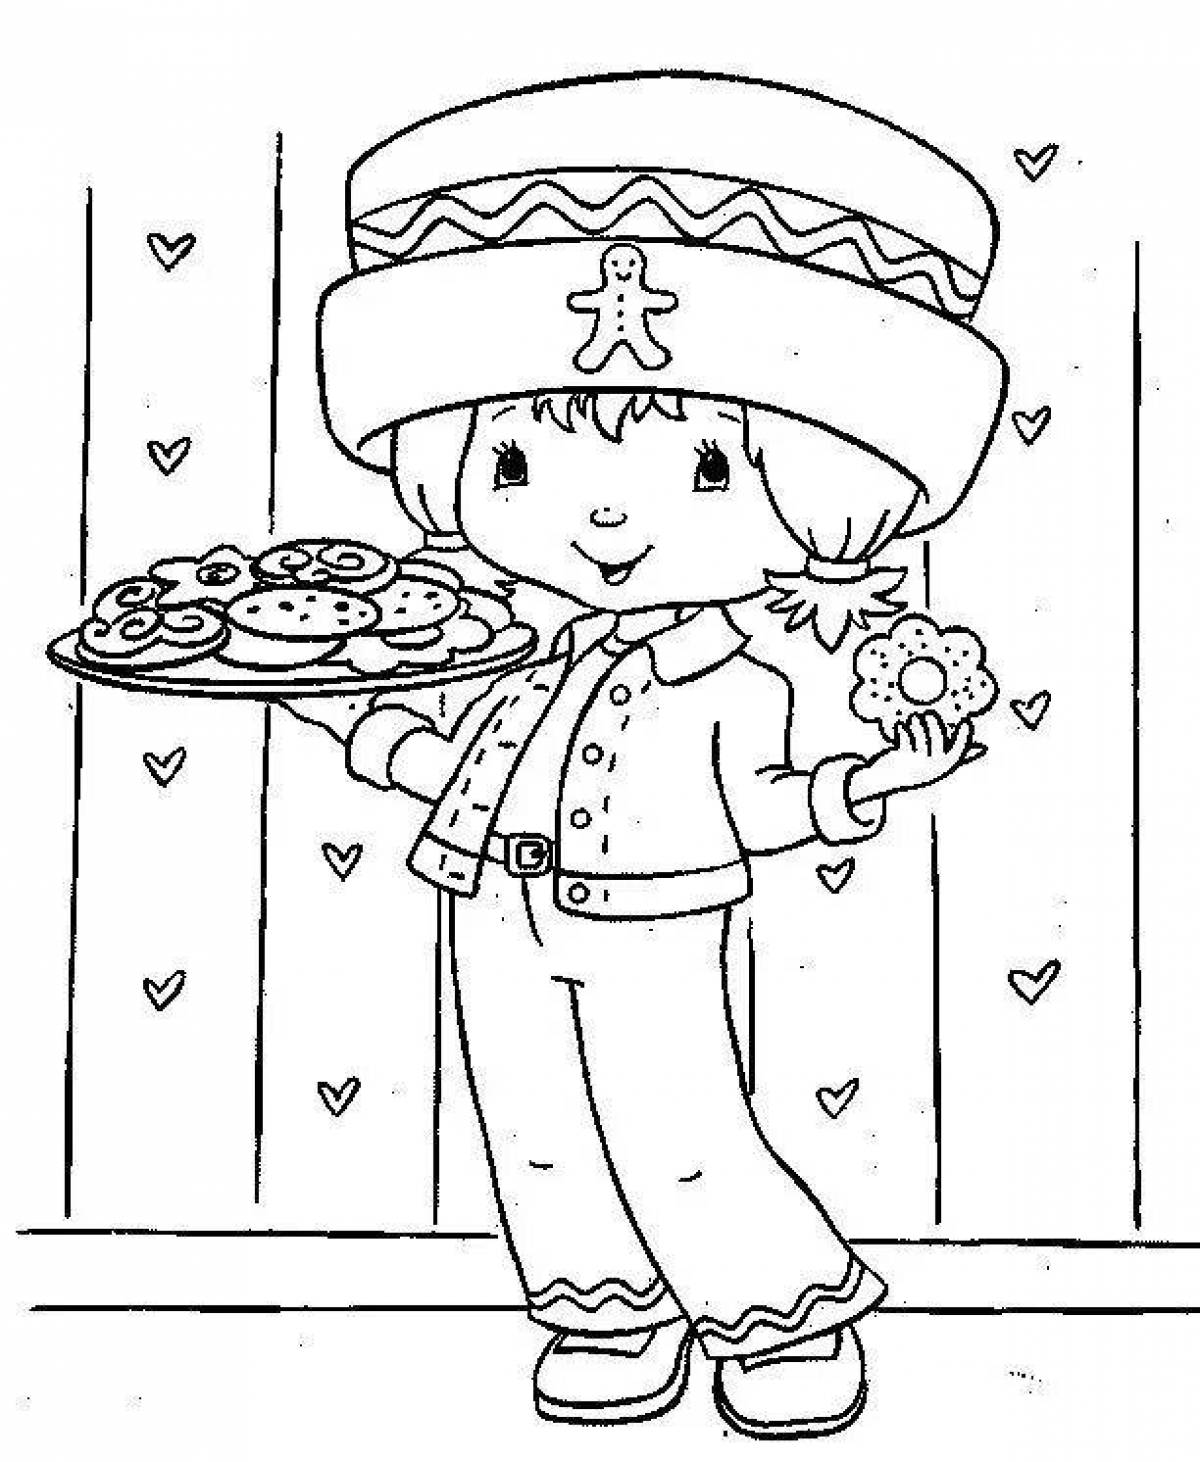 Coloring page adorable cheesecake